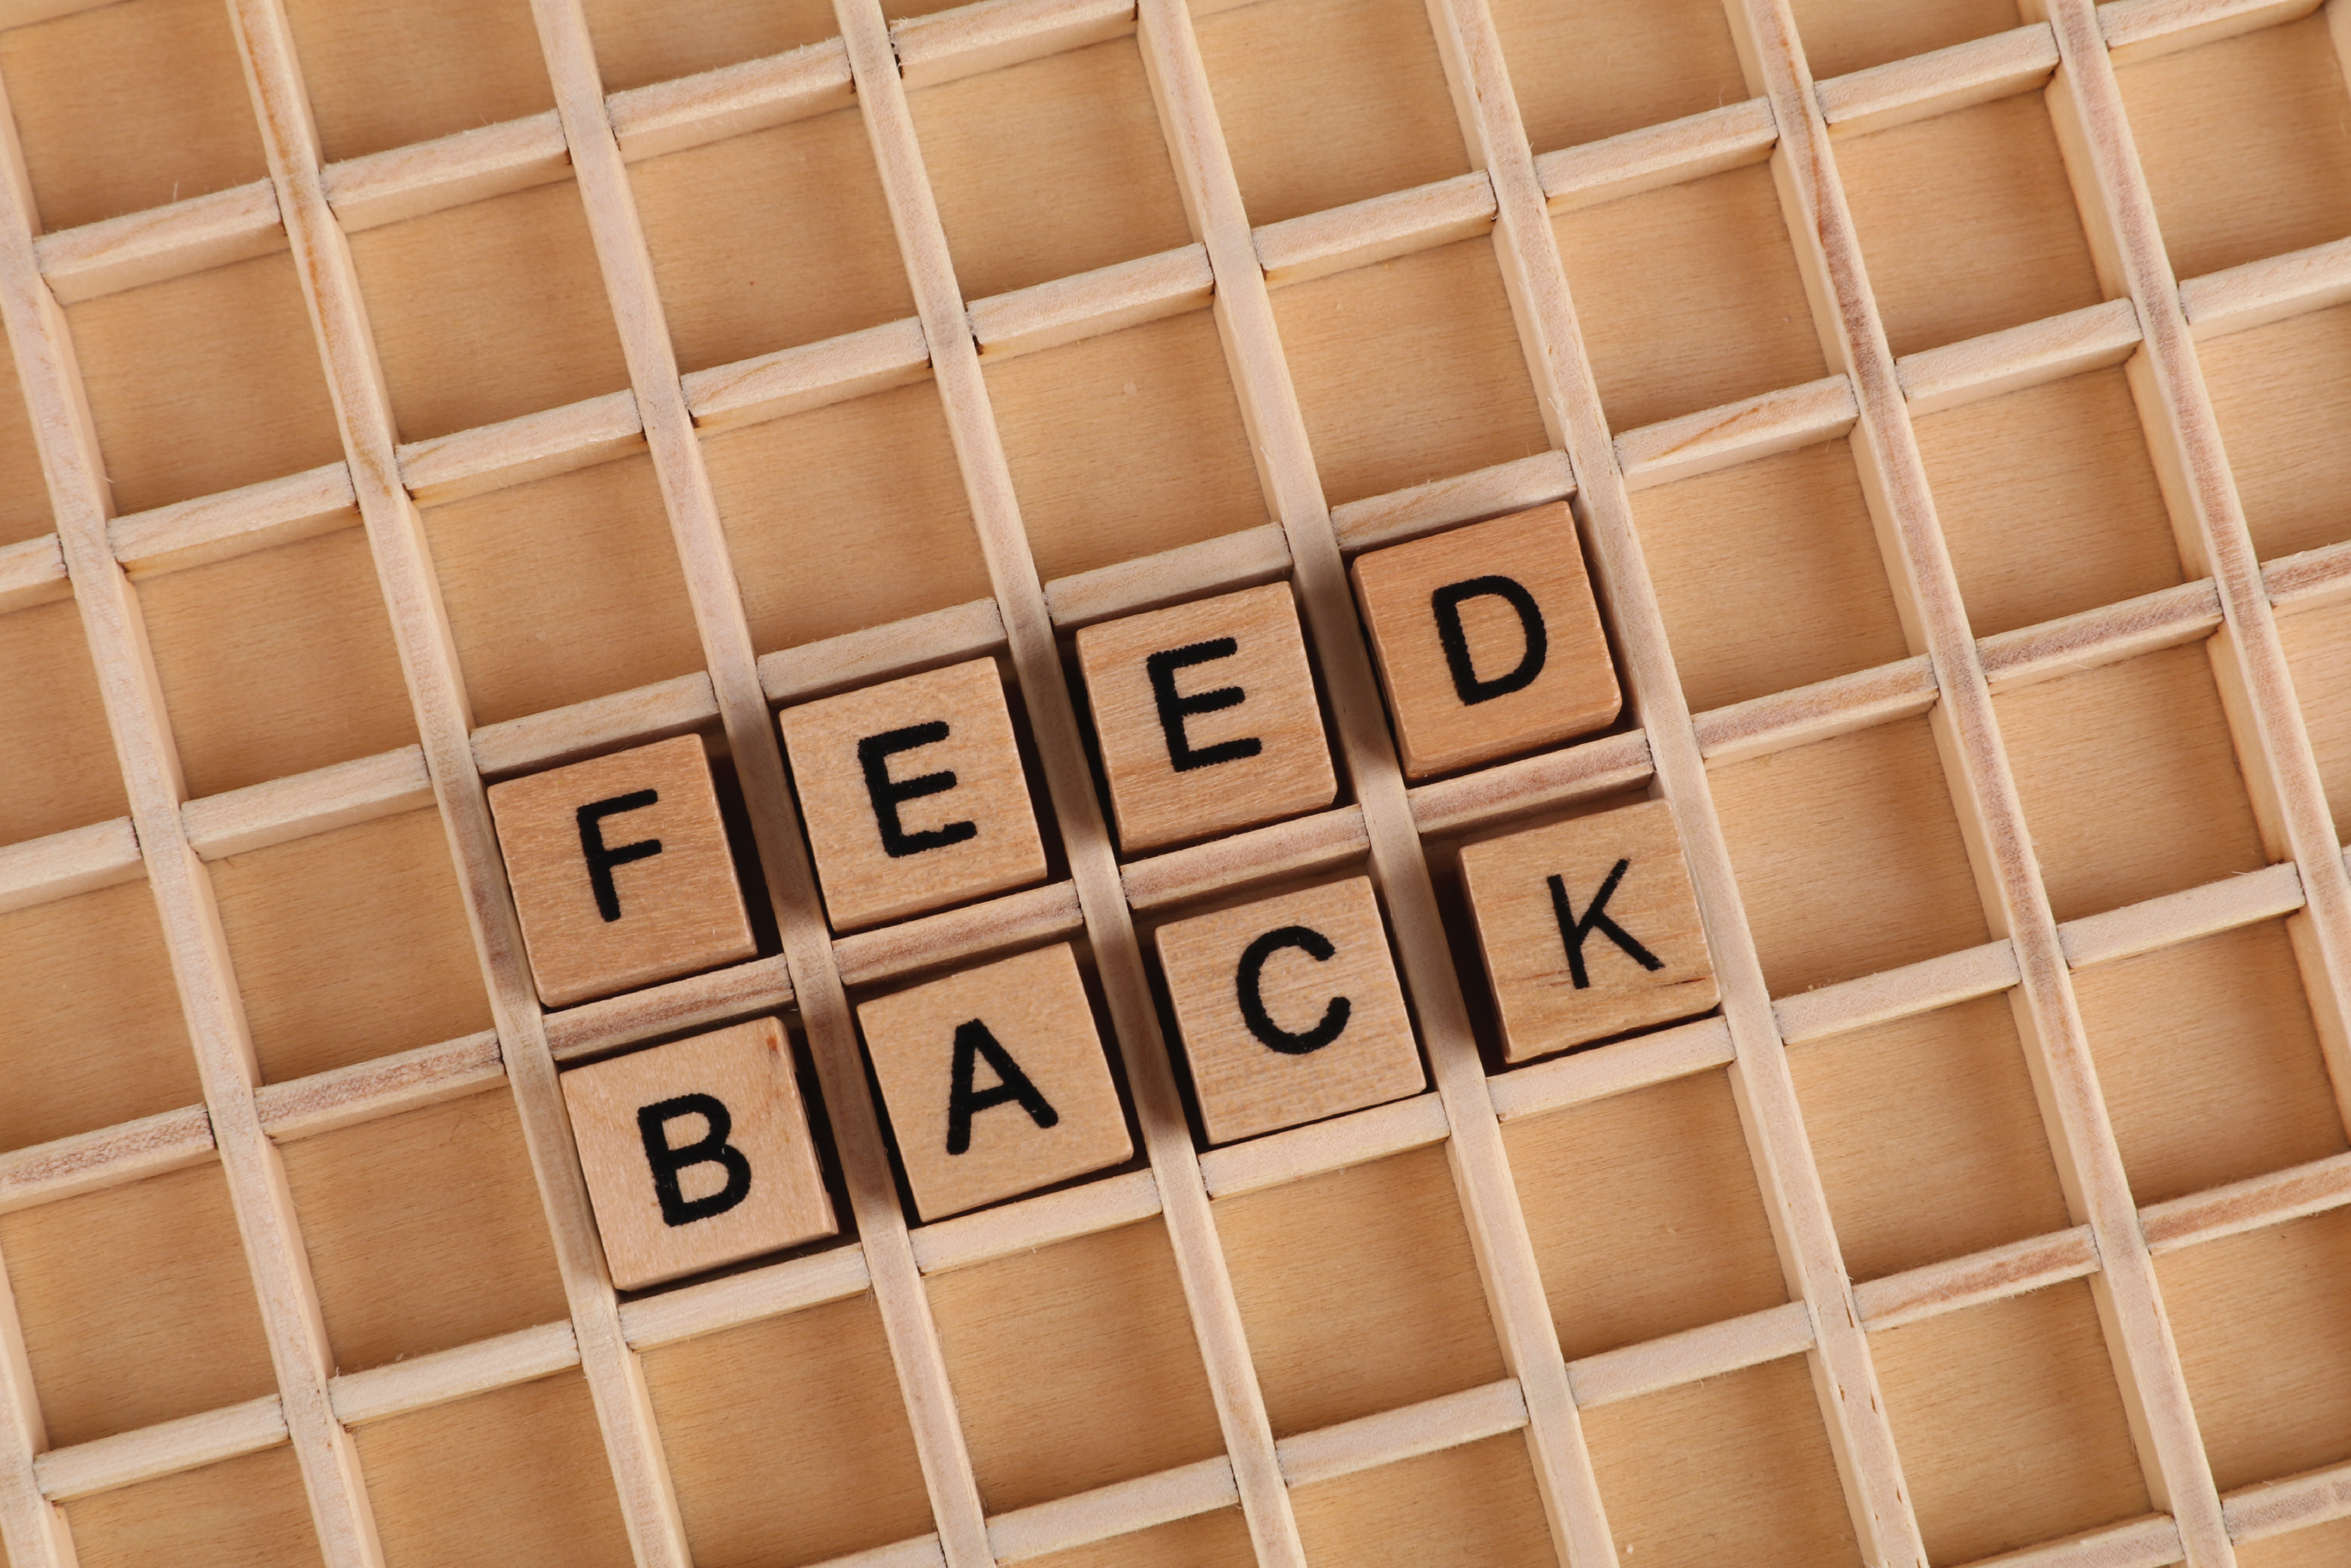 A wooden grid with wooden tiles spelling out "Feedback"